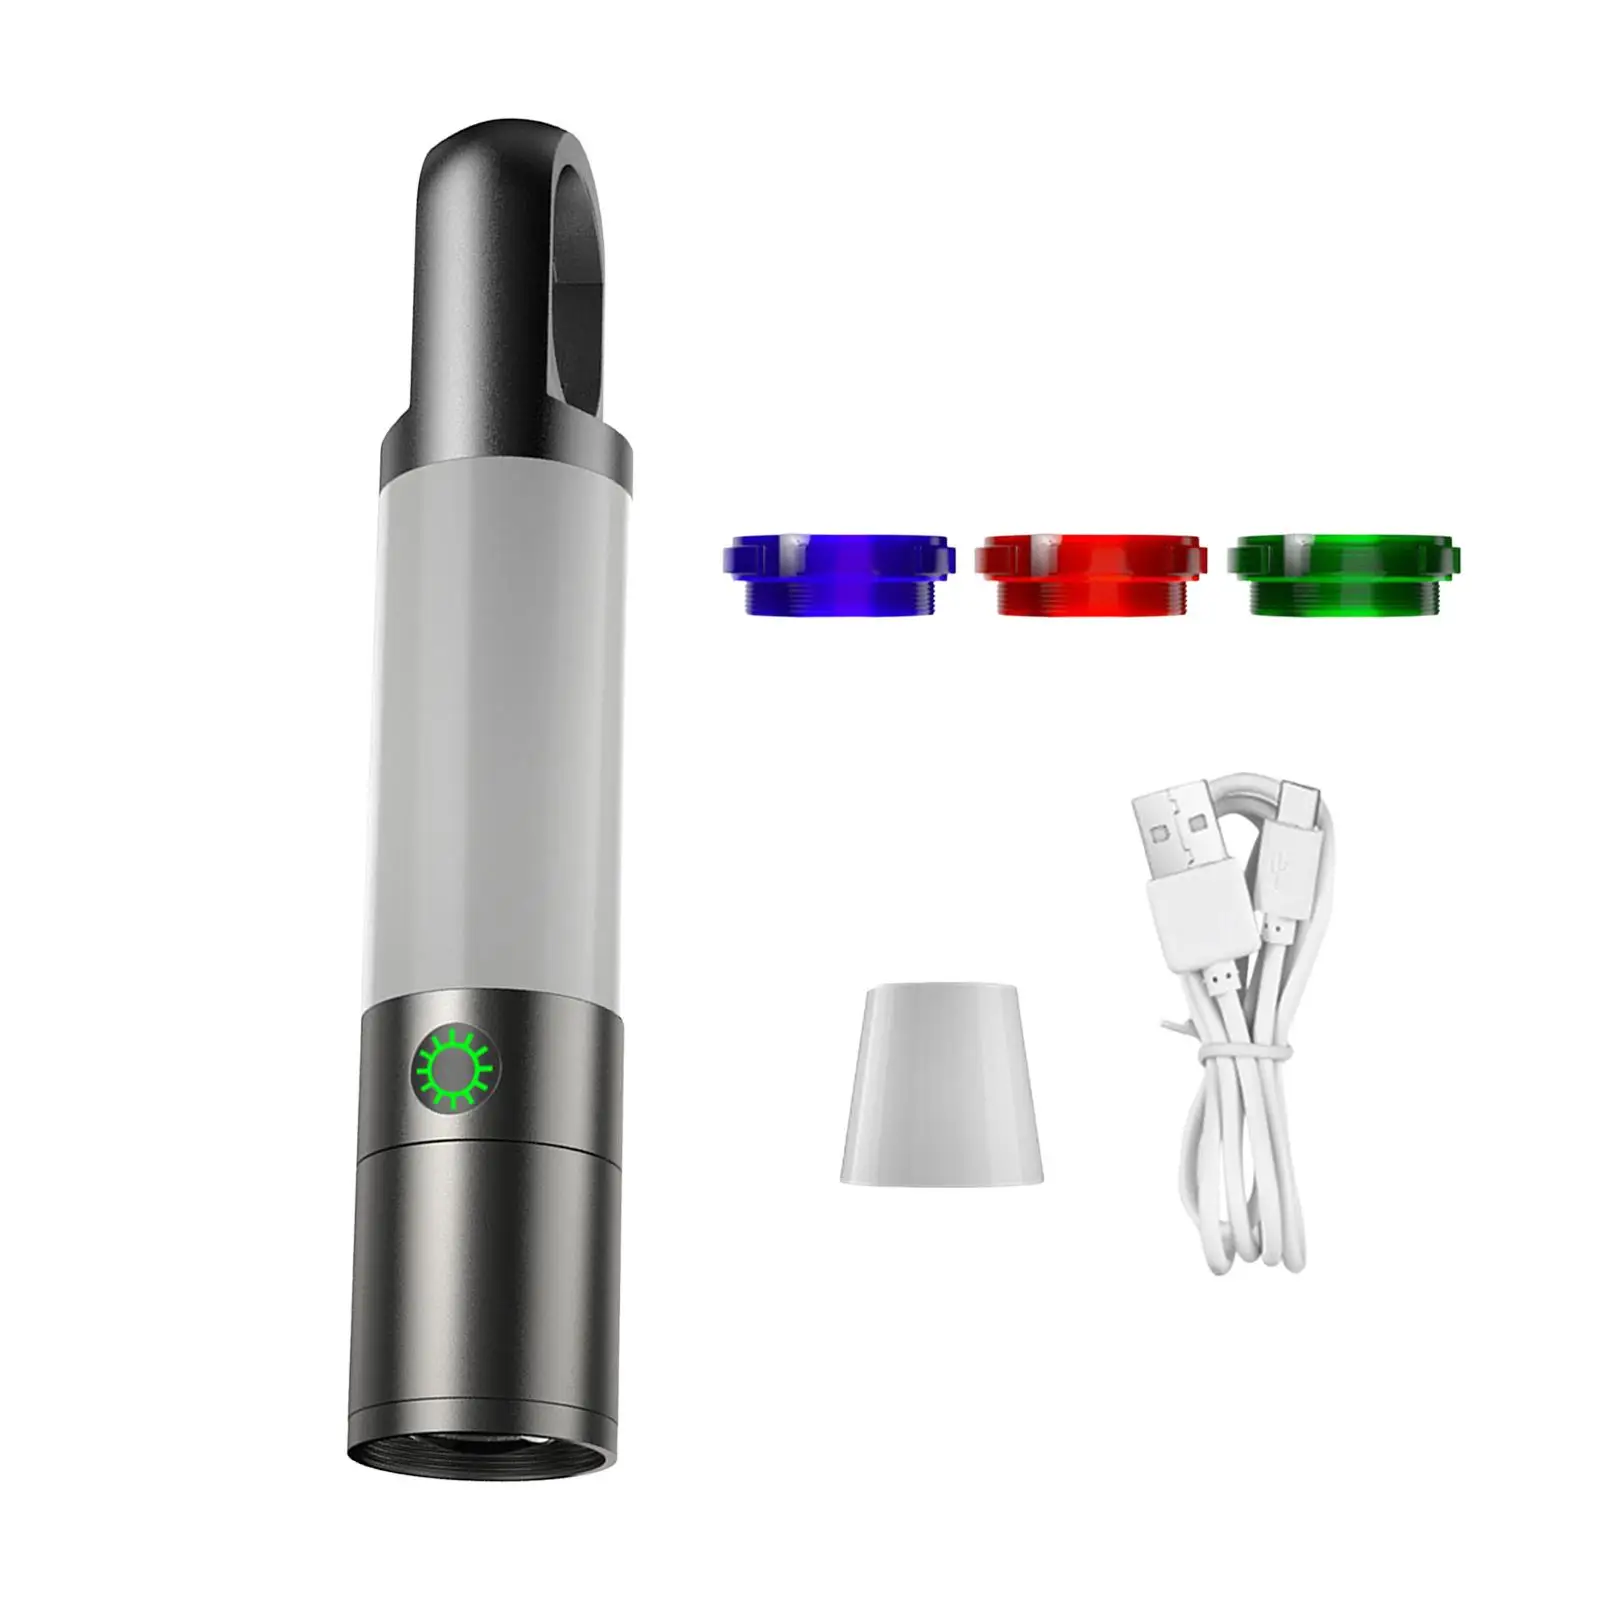 Zoomable Flashlight 8 Lights Modes Camp Lamp for Fishing Climbing Walking